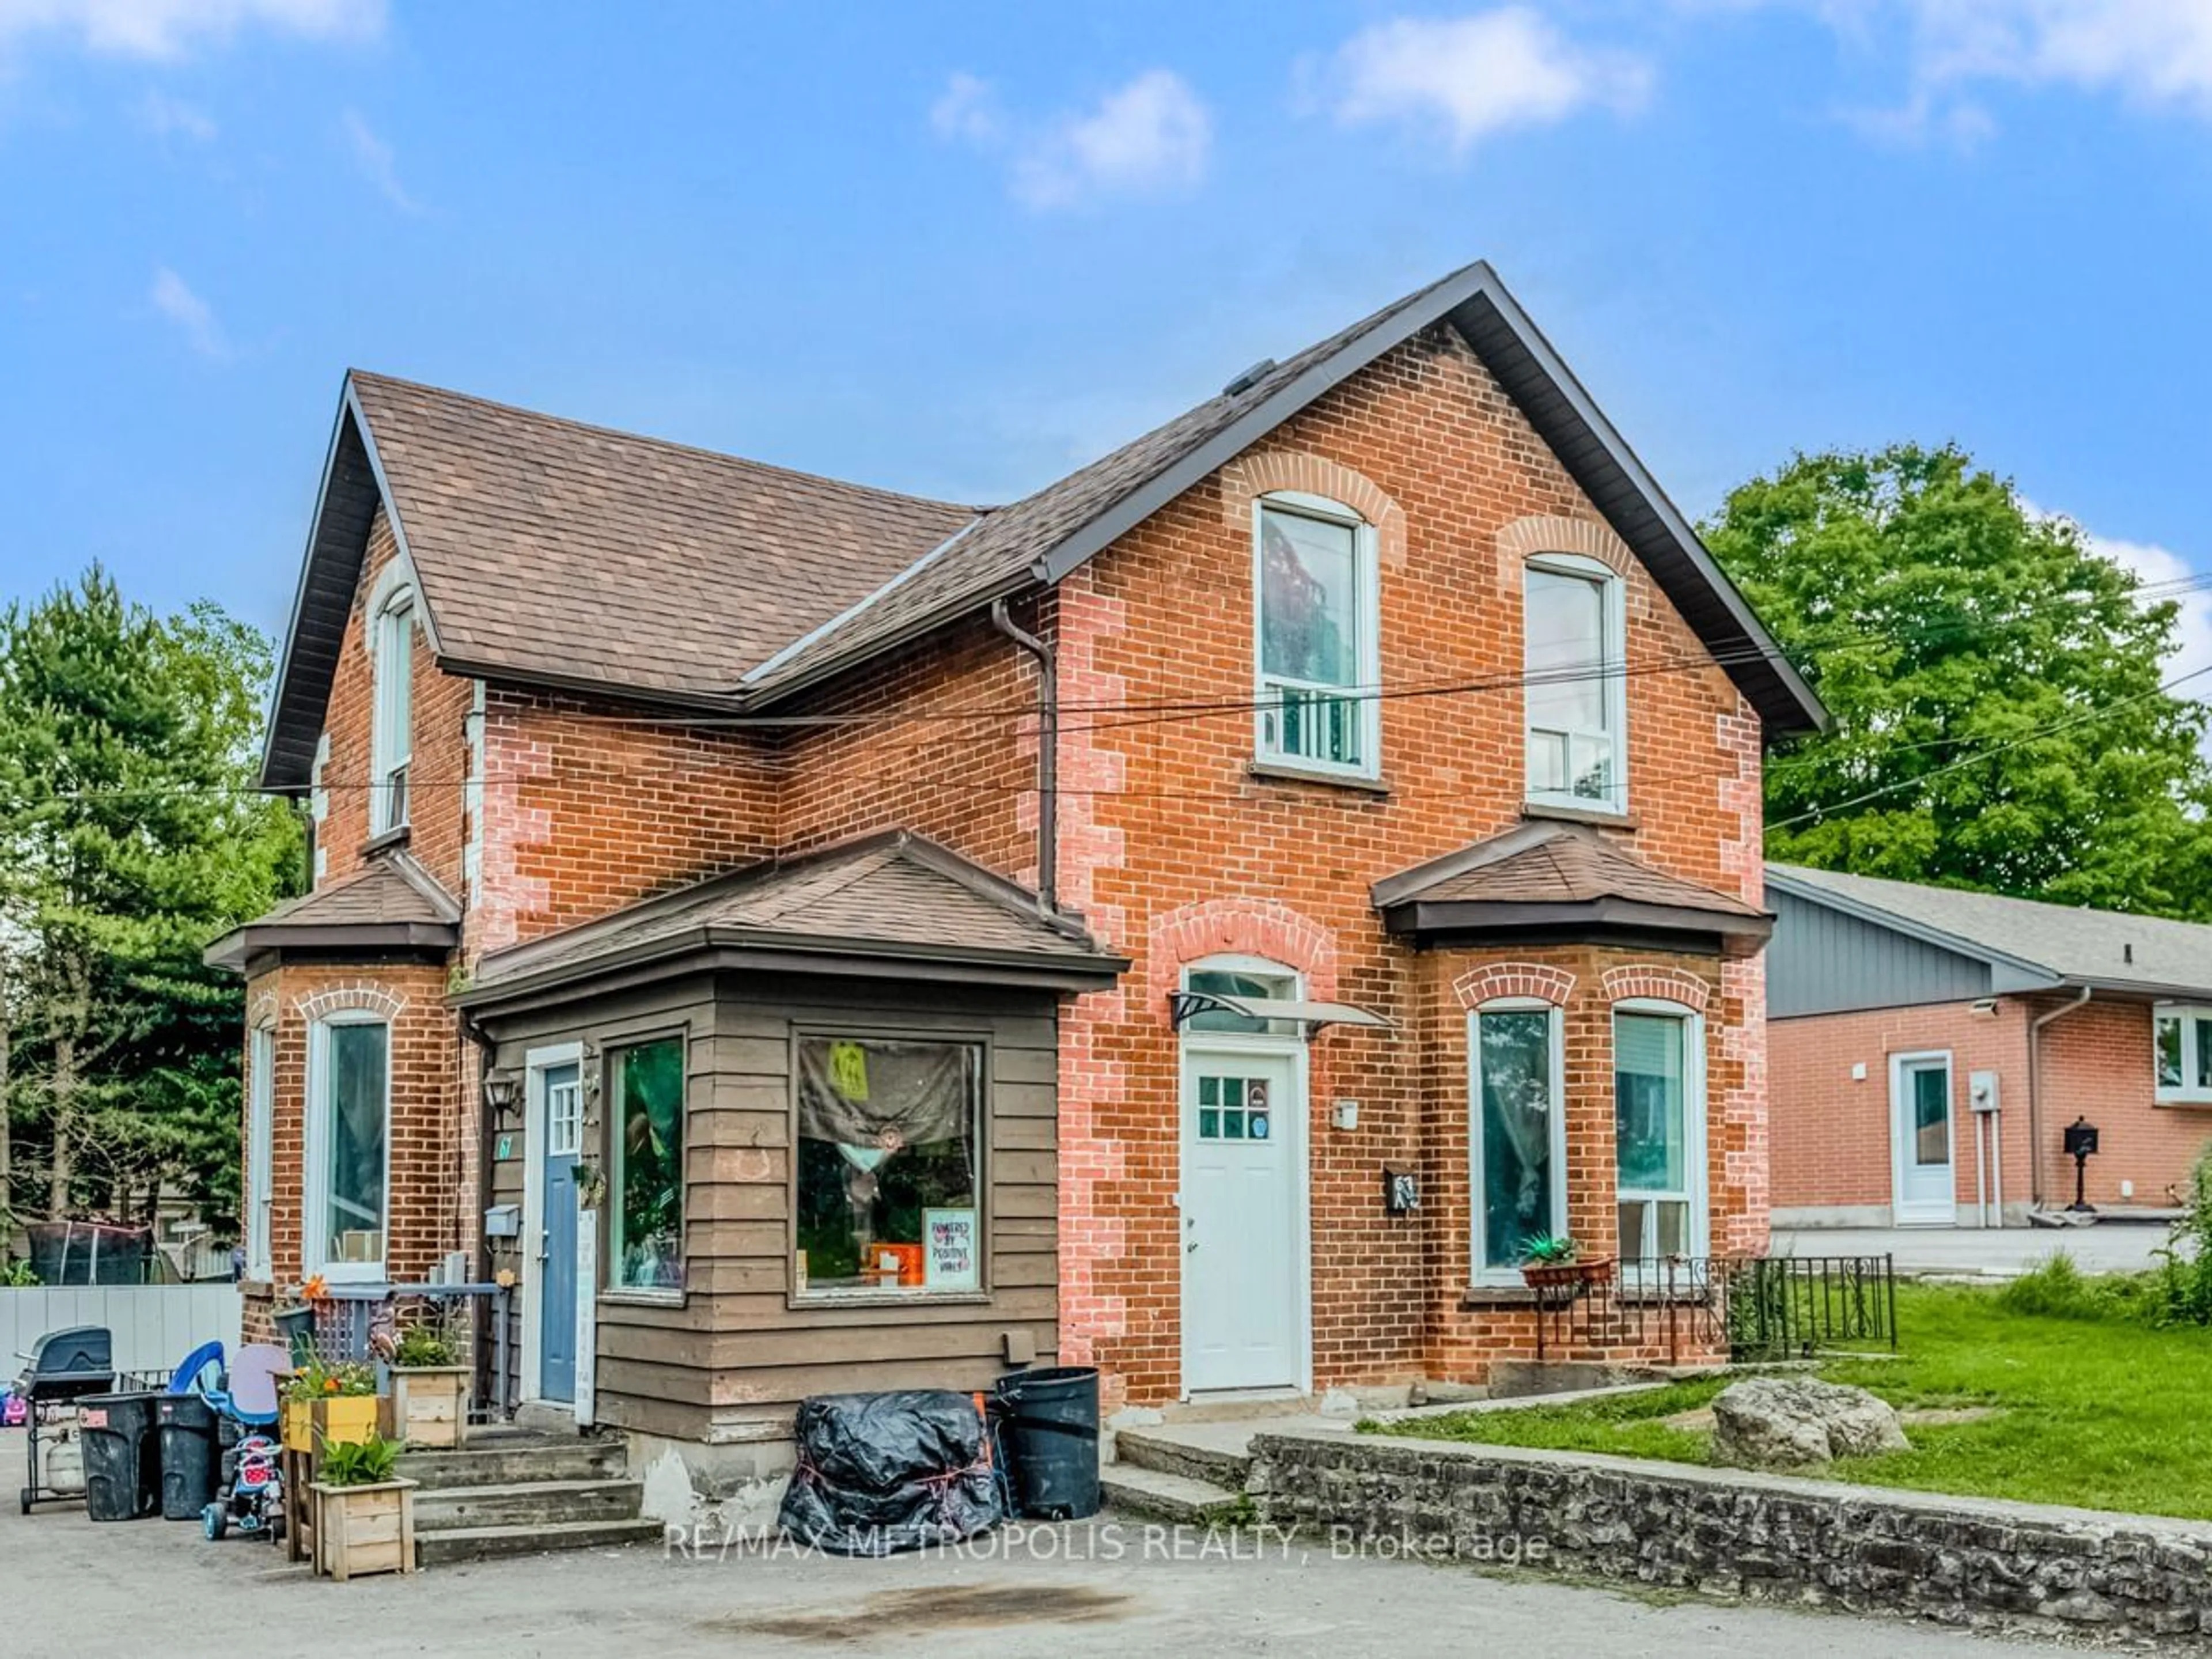 Home with brick exterior material for 67 Town Line, Orangeville Ontario L9W 1V5